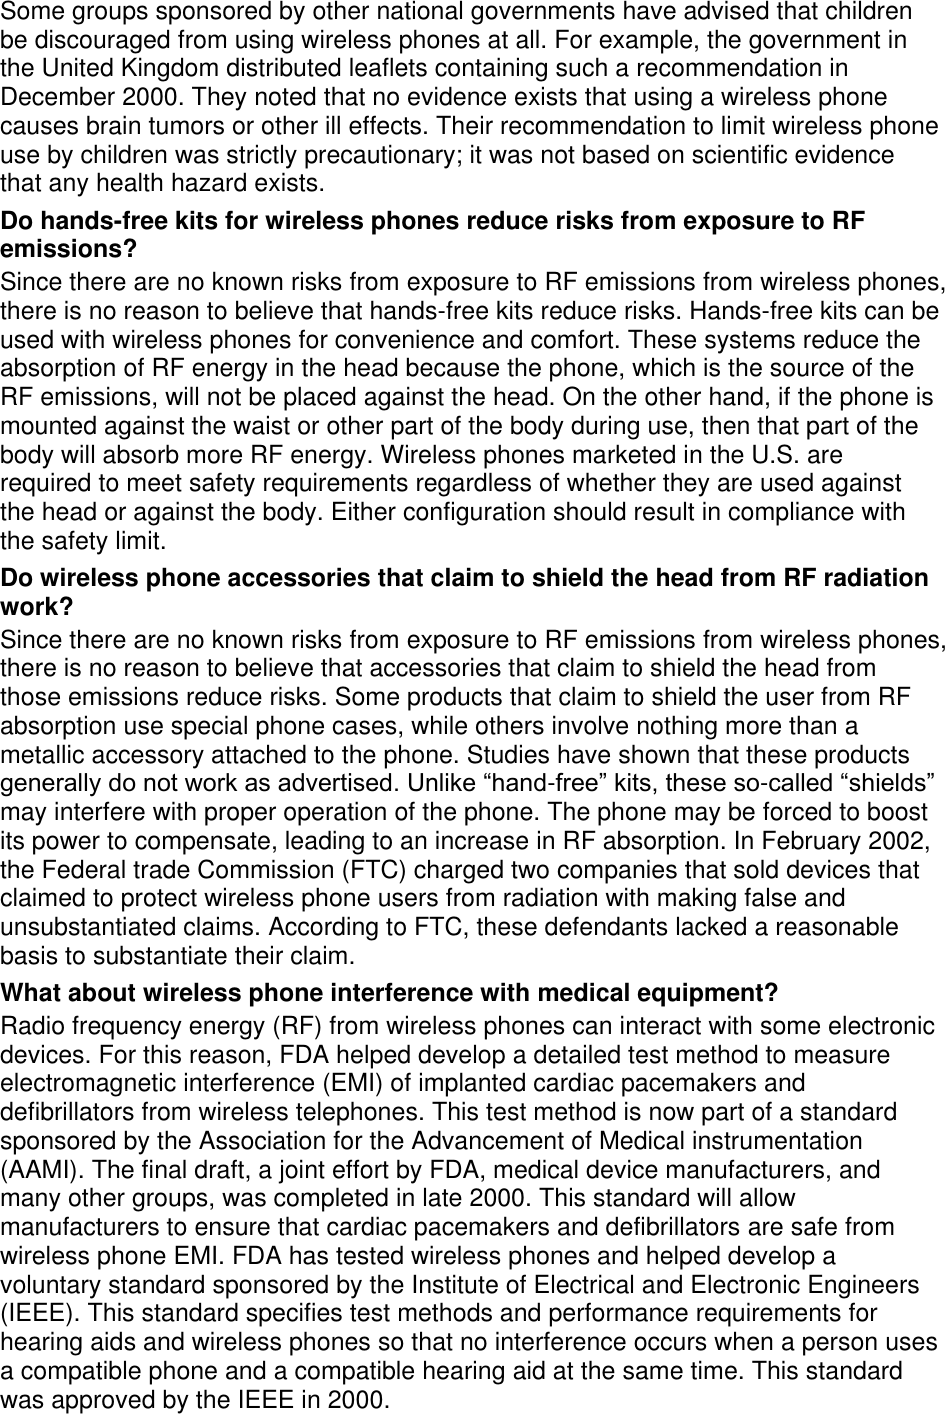 Some groups sponsored by other national governments have advised that children be discouraged from using wireless phones at all. For example, the government in the United Kingdom distributed leaflets containing such a recommendation in December 2000. They noted that no evidence exists that using a wireless phone causes brain tumors or other ill effects. Their recommendation to limit wireless phone use by children was strictly precautionary; it was not based on scientific evidence that any health hazard exists.   Do hands-free kits for wireless phones reduce risks from exposure to RF emissions? Since there are no known risks from exposure to RF emissions from wireless phones, there is no reason to believe that hands-free kits reduce risks. Hands-free kits can be used with wireless phones for convenience and comfort. These systems reduce the absorption of RF energy in the head because the phone, which is the source of the RF emissions, will not be placed against the head. On the other hand, if the phone is mounted against the waist or other part of the body during use, then that part of the body will absorb more RF energy. Wireless phones marketed in the U.S. are required to meet safety requirements regardless of whether they are used against the head or against the body. Either configuration should result in compliance with the safety limit. Do wireless phone accessories that claim to shield the head from RF radiation work? Since there are no known risks from exposure to RF emissions from wireless phones, there is no reason to believe that accessories that claim to shield the head from those emissions reduce risks. Some products that claim to shield the user from RF absorption use special phone cases, while others involve nothing more than a metallic accessory attached to the phone. Studies have shown that these products generally do not work as advertised. Unlike “hand-free” kits, these so-called “shields” may interfere with proper operation of the phone. The phone may be forced to boost its power to compensate, leading to an increase in RF absorption. In February 2002, the Federal trade Commission (FTC) charged two companies that sold devices that claimed to protect wireless phone users from radiation with making false and unsubstantiated claims. According to FTC, these defendants lacked a reasonable basis to substantiate their claim. What about wireless phone interference with medical equipment? Radio frequency energy (RF) from wireless phones can interact with some electronic devices. For this reason, FDA helped develop a detailed test method to measure electromagnetic interference (EMI) of implanted cardiac pacemakers and defibrillators from wireless telephones. This test method is now part of a standard sponsored by the Association for the Advancement of Medical instrumentation (AAMI). The final draft, a joint effort by FDA, medical device manufacturers, and many other groups, was completed in late 2000. This standard will allow manufacturers to ensure that cardiac pacemakers and defibrillators are safe from wireless phone EMI. FDA has tested wireless phones and helped develop a voluntary standard sponsored by the Institute of Electrical and Electronic Engineers (IEEE). This standard specifies test methods and performance requirements for hearing aids and wireless phones so that no interference occurs when a person uses a compatible phone and a compatible hearing aid at the same time. This standard was approved by the IEEE in 2000. 